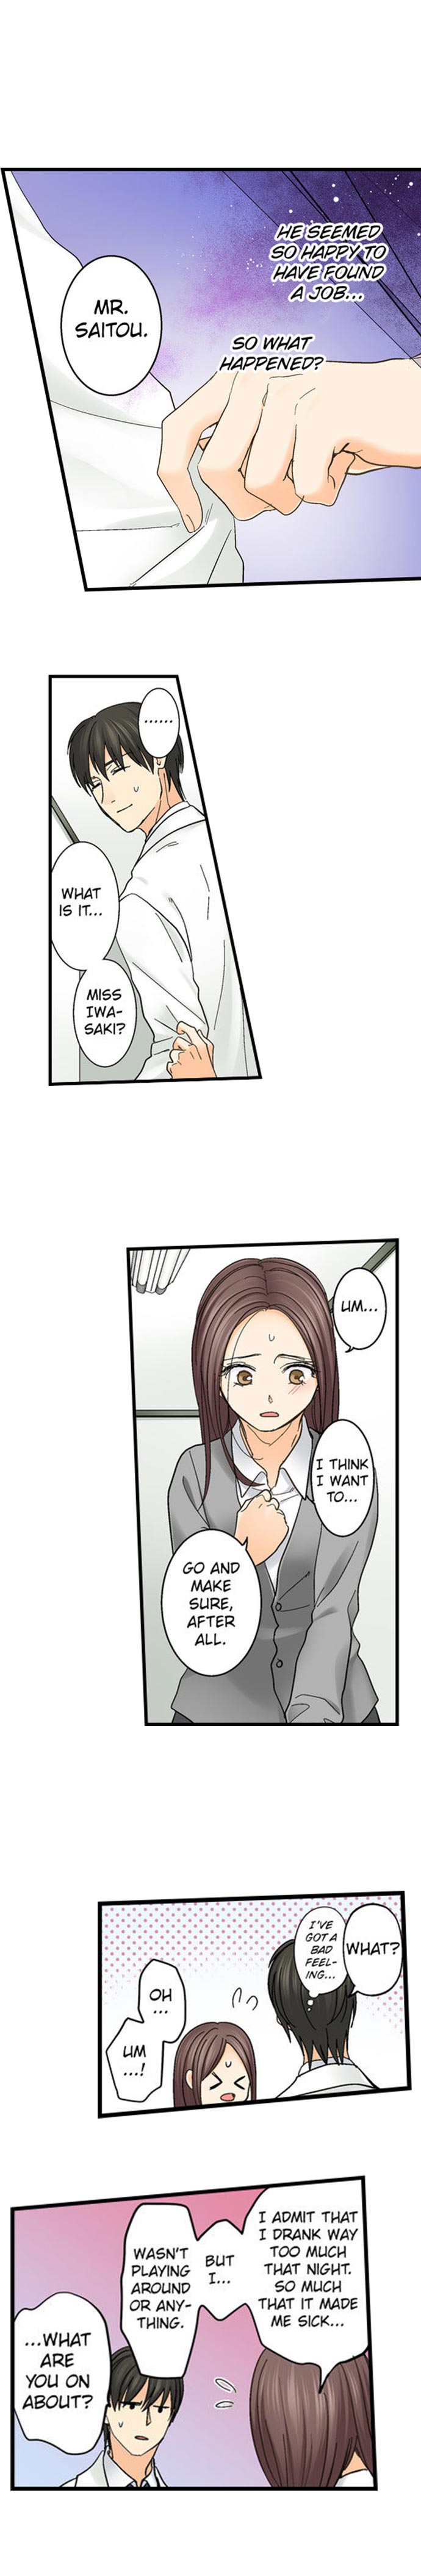 Running a Love Hotel with My Math Teacher - Chapter 85 Page 8